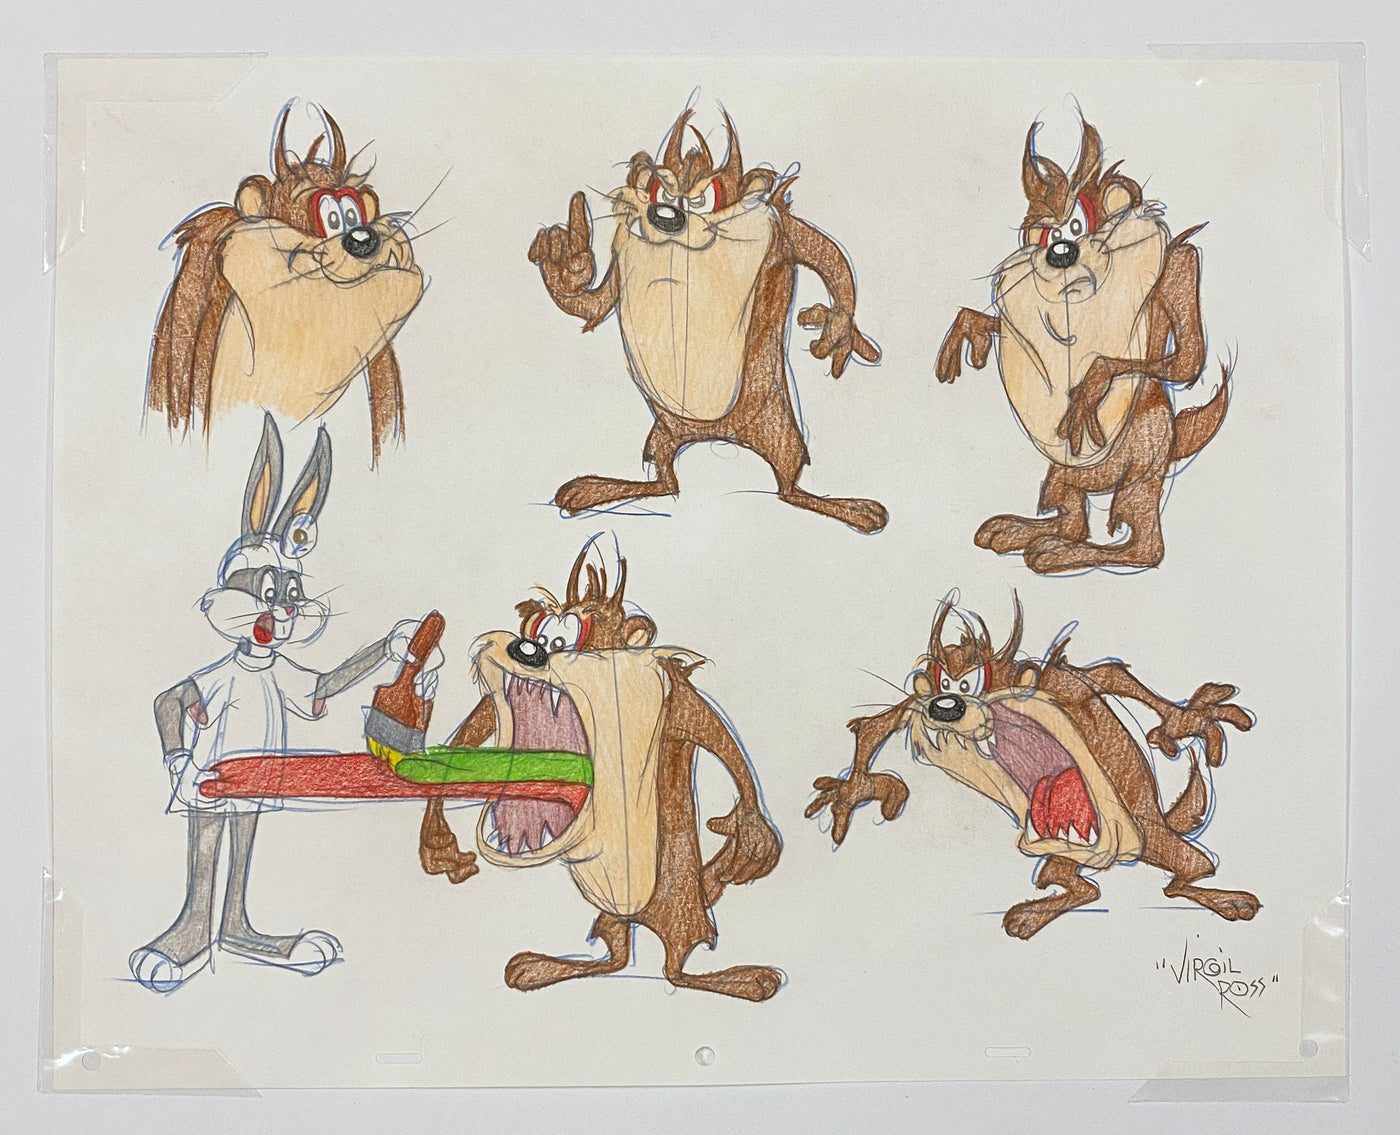 Original Warner Brothers Virgil Ross Model Sheet Animation Drawing featuring the Tasmanian Devil and Bugs Bunny